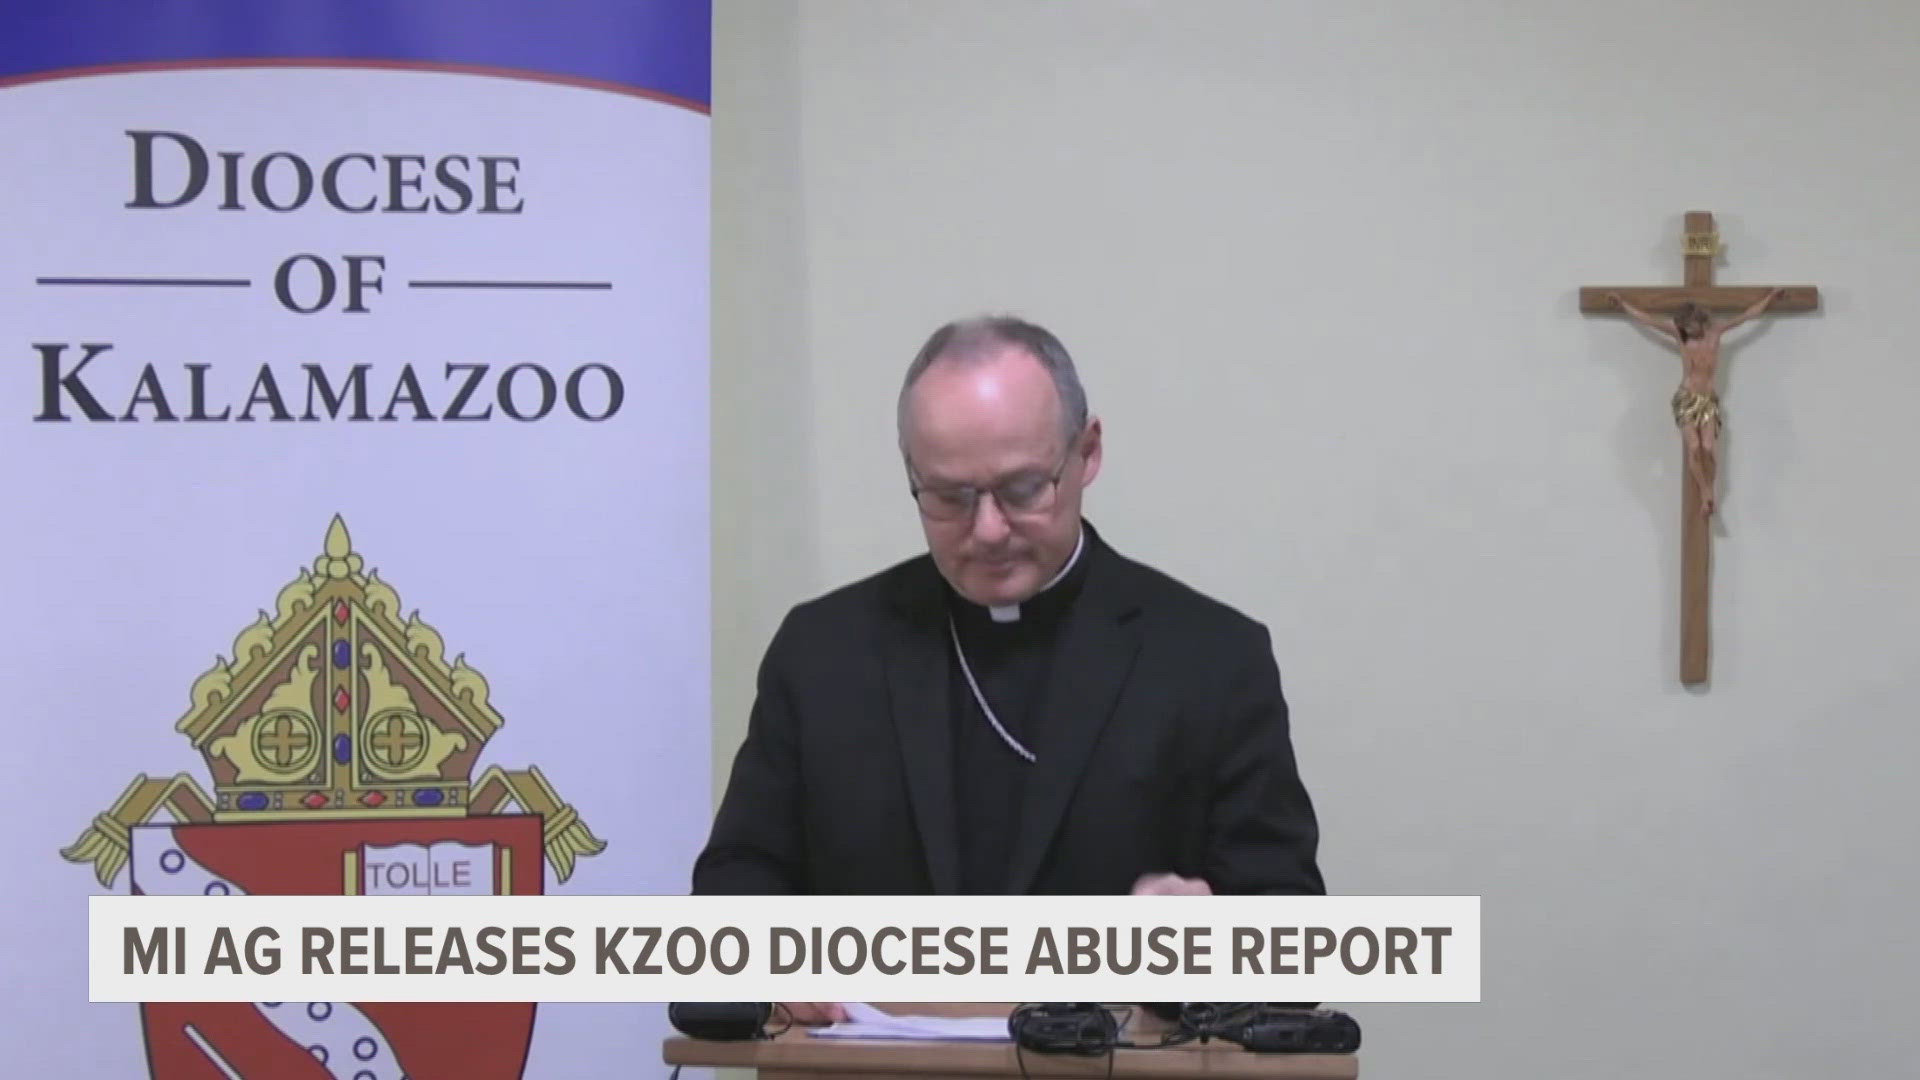 The Attorney General's report includes 52 total allegations, 28 of which involve children. The diocese said none of the accused are actively serving in ministry.